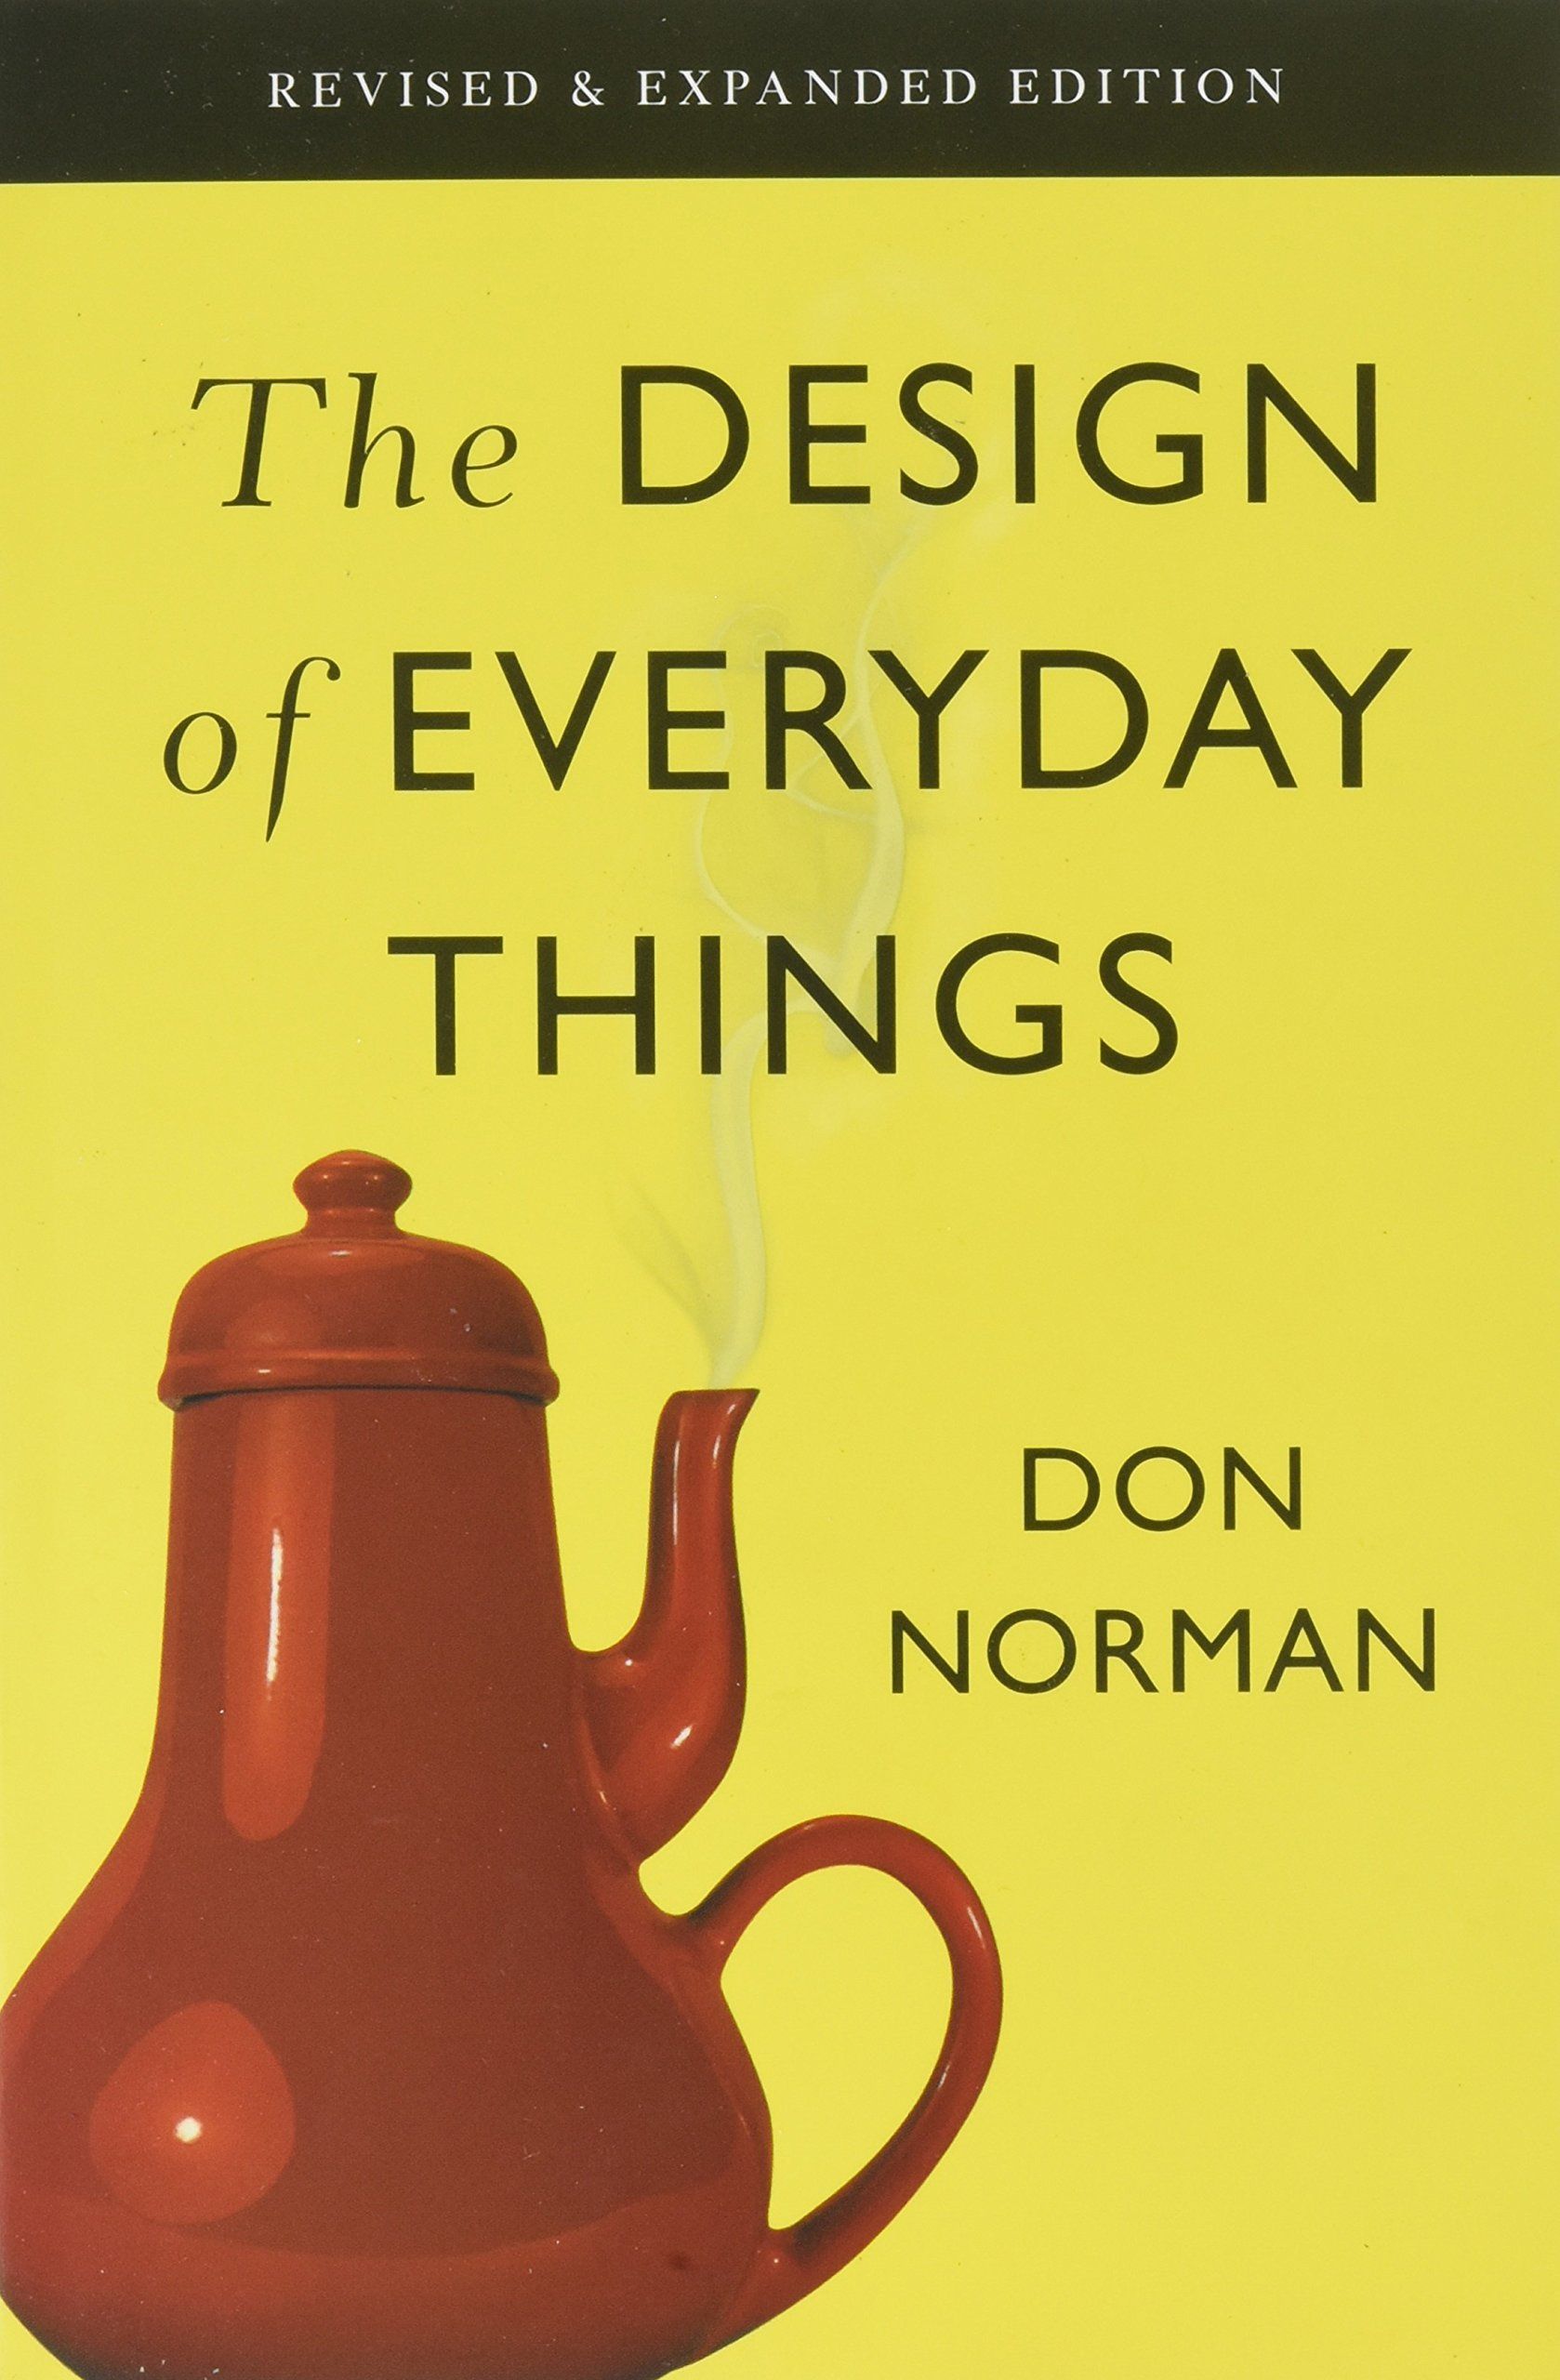 The Design of Everyday Things summary